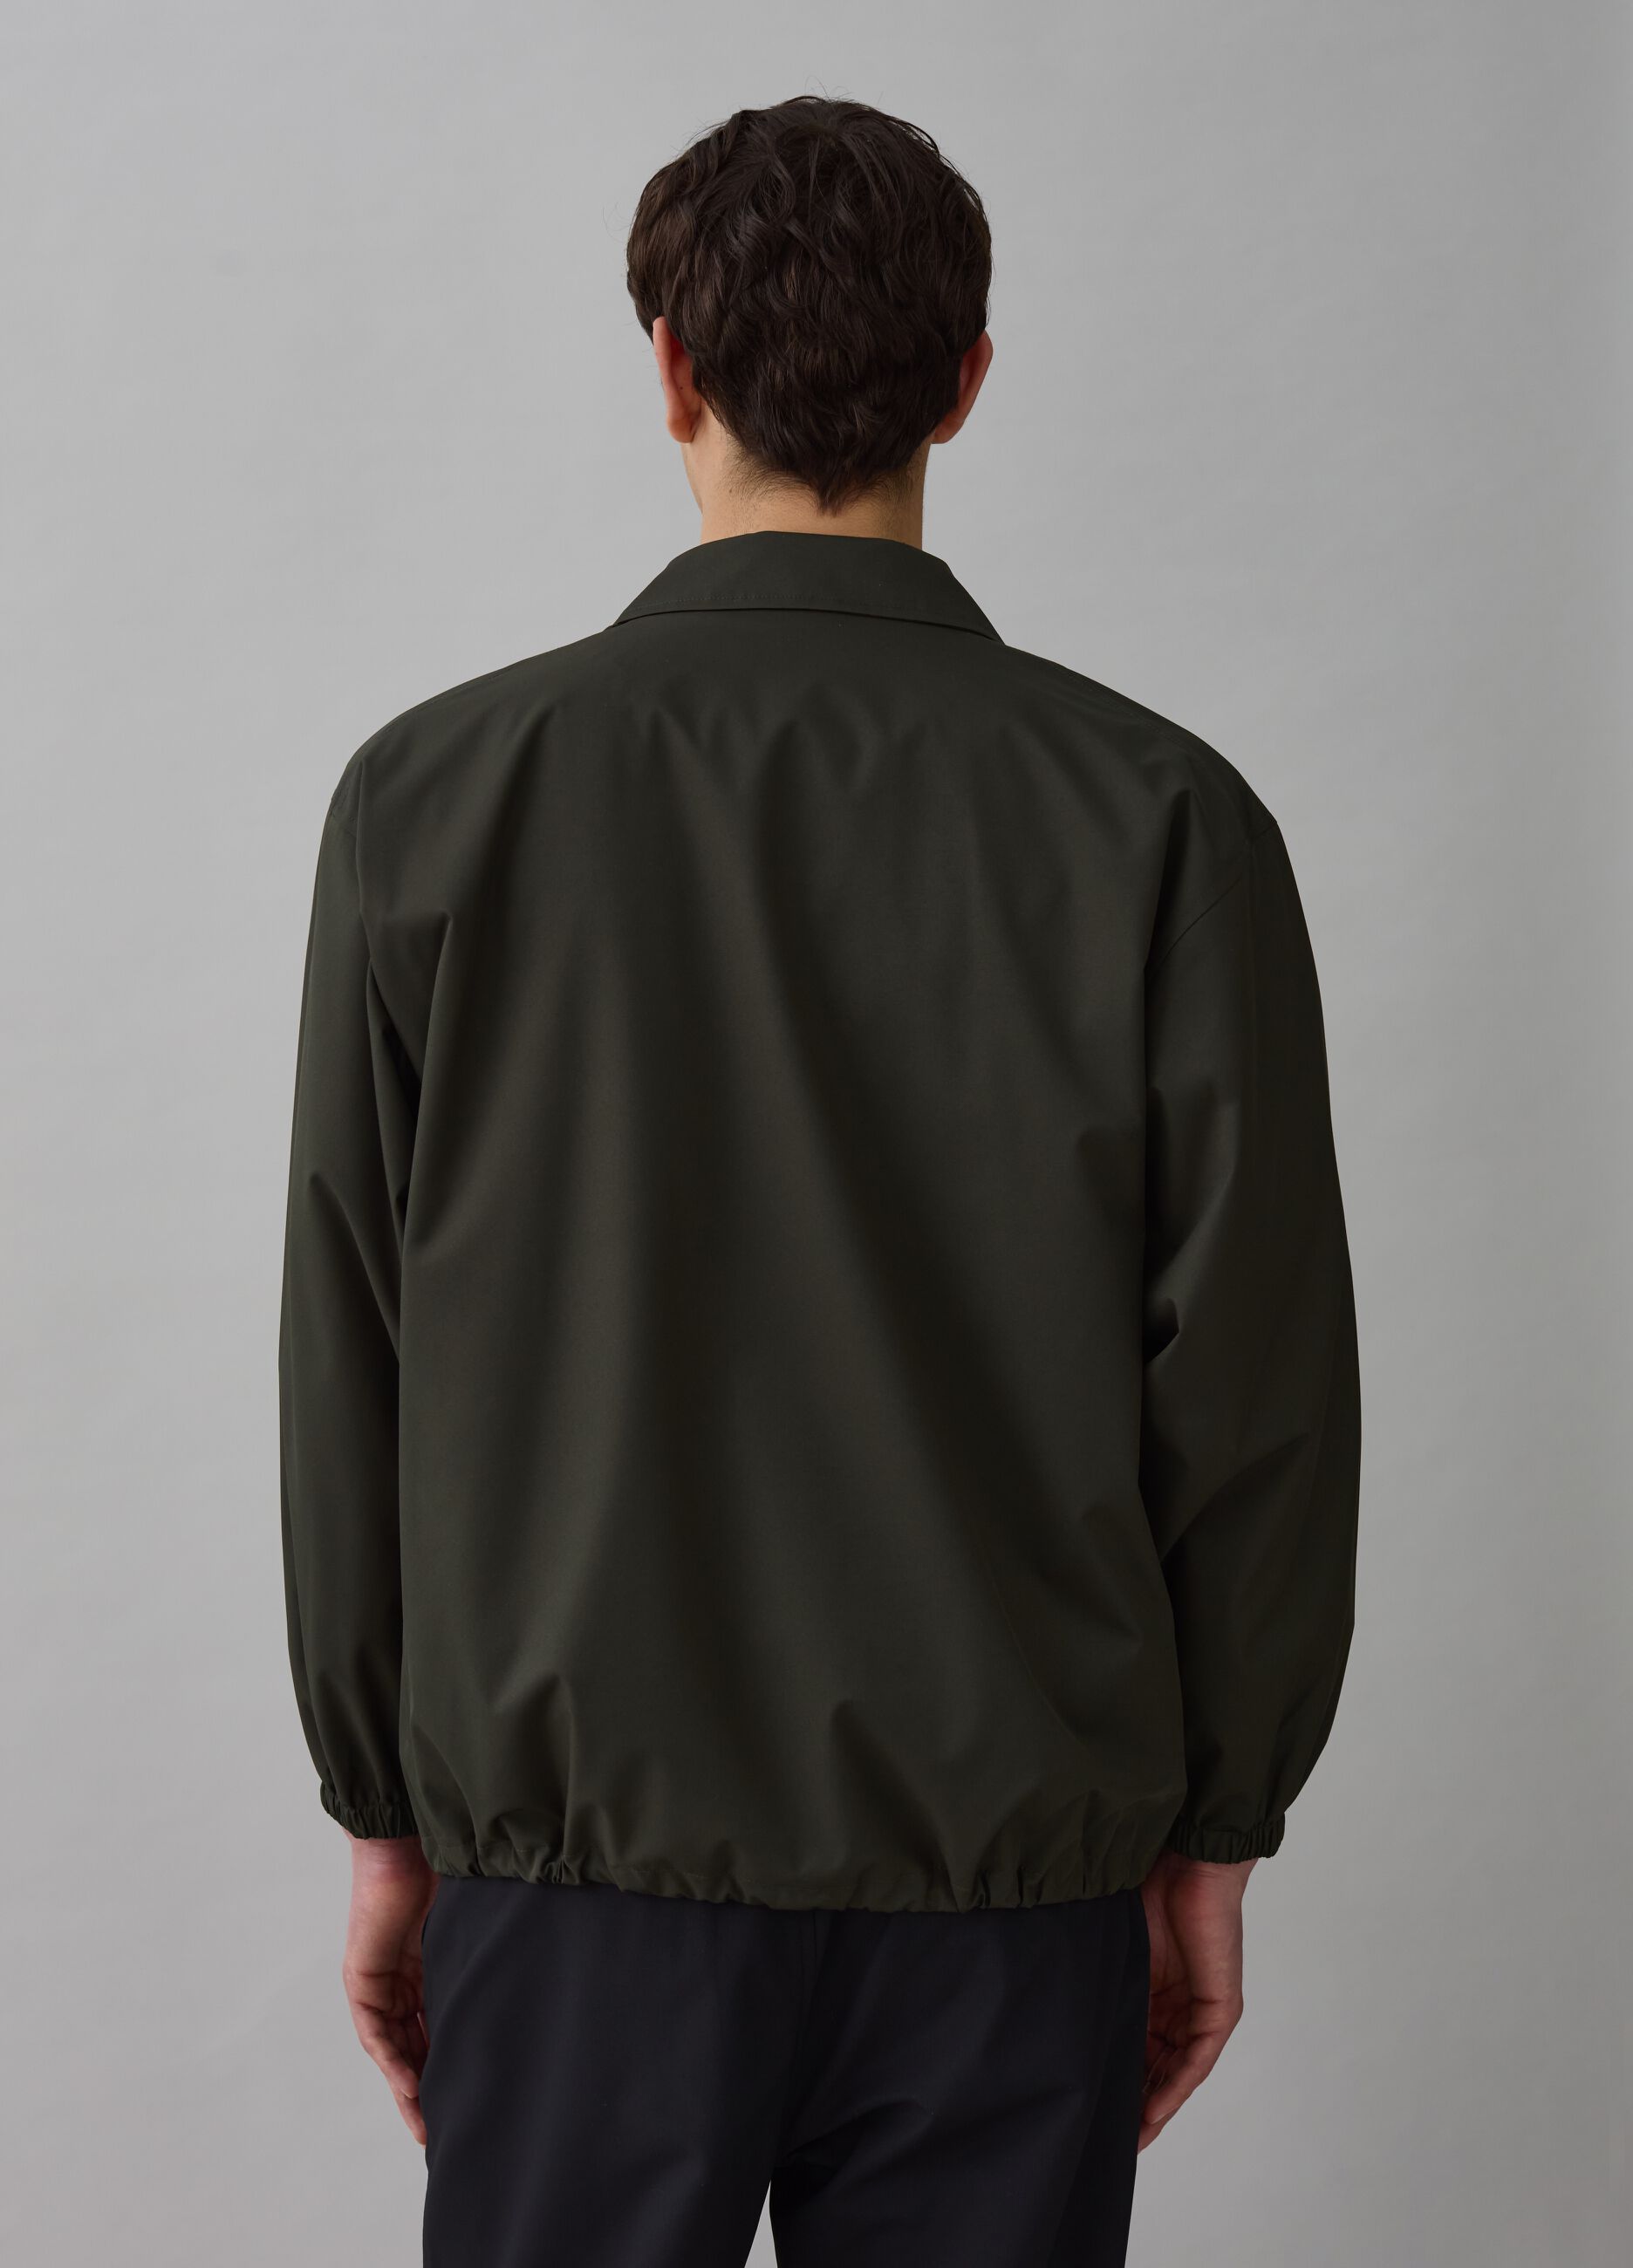 Selection jacket in technical fabric with drawstring